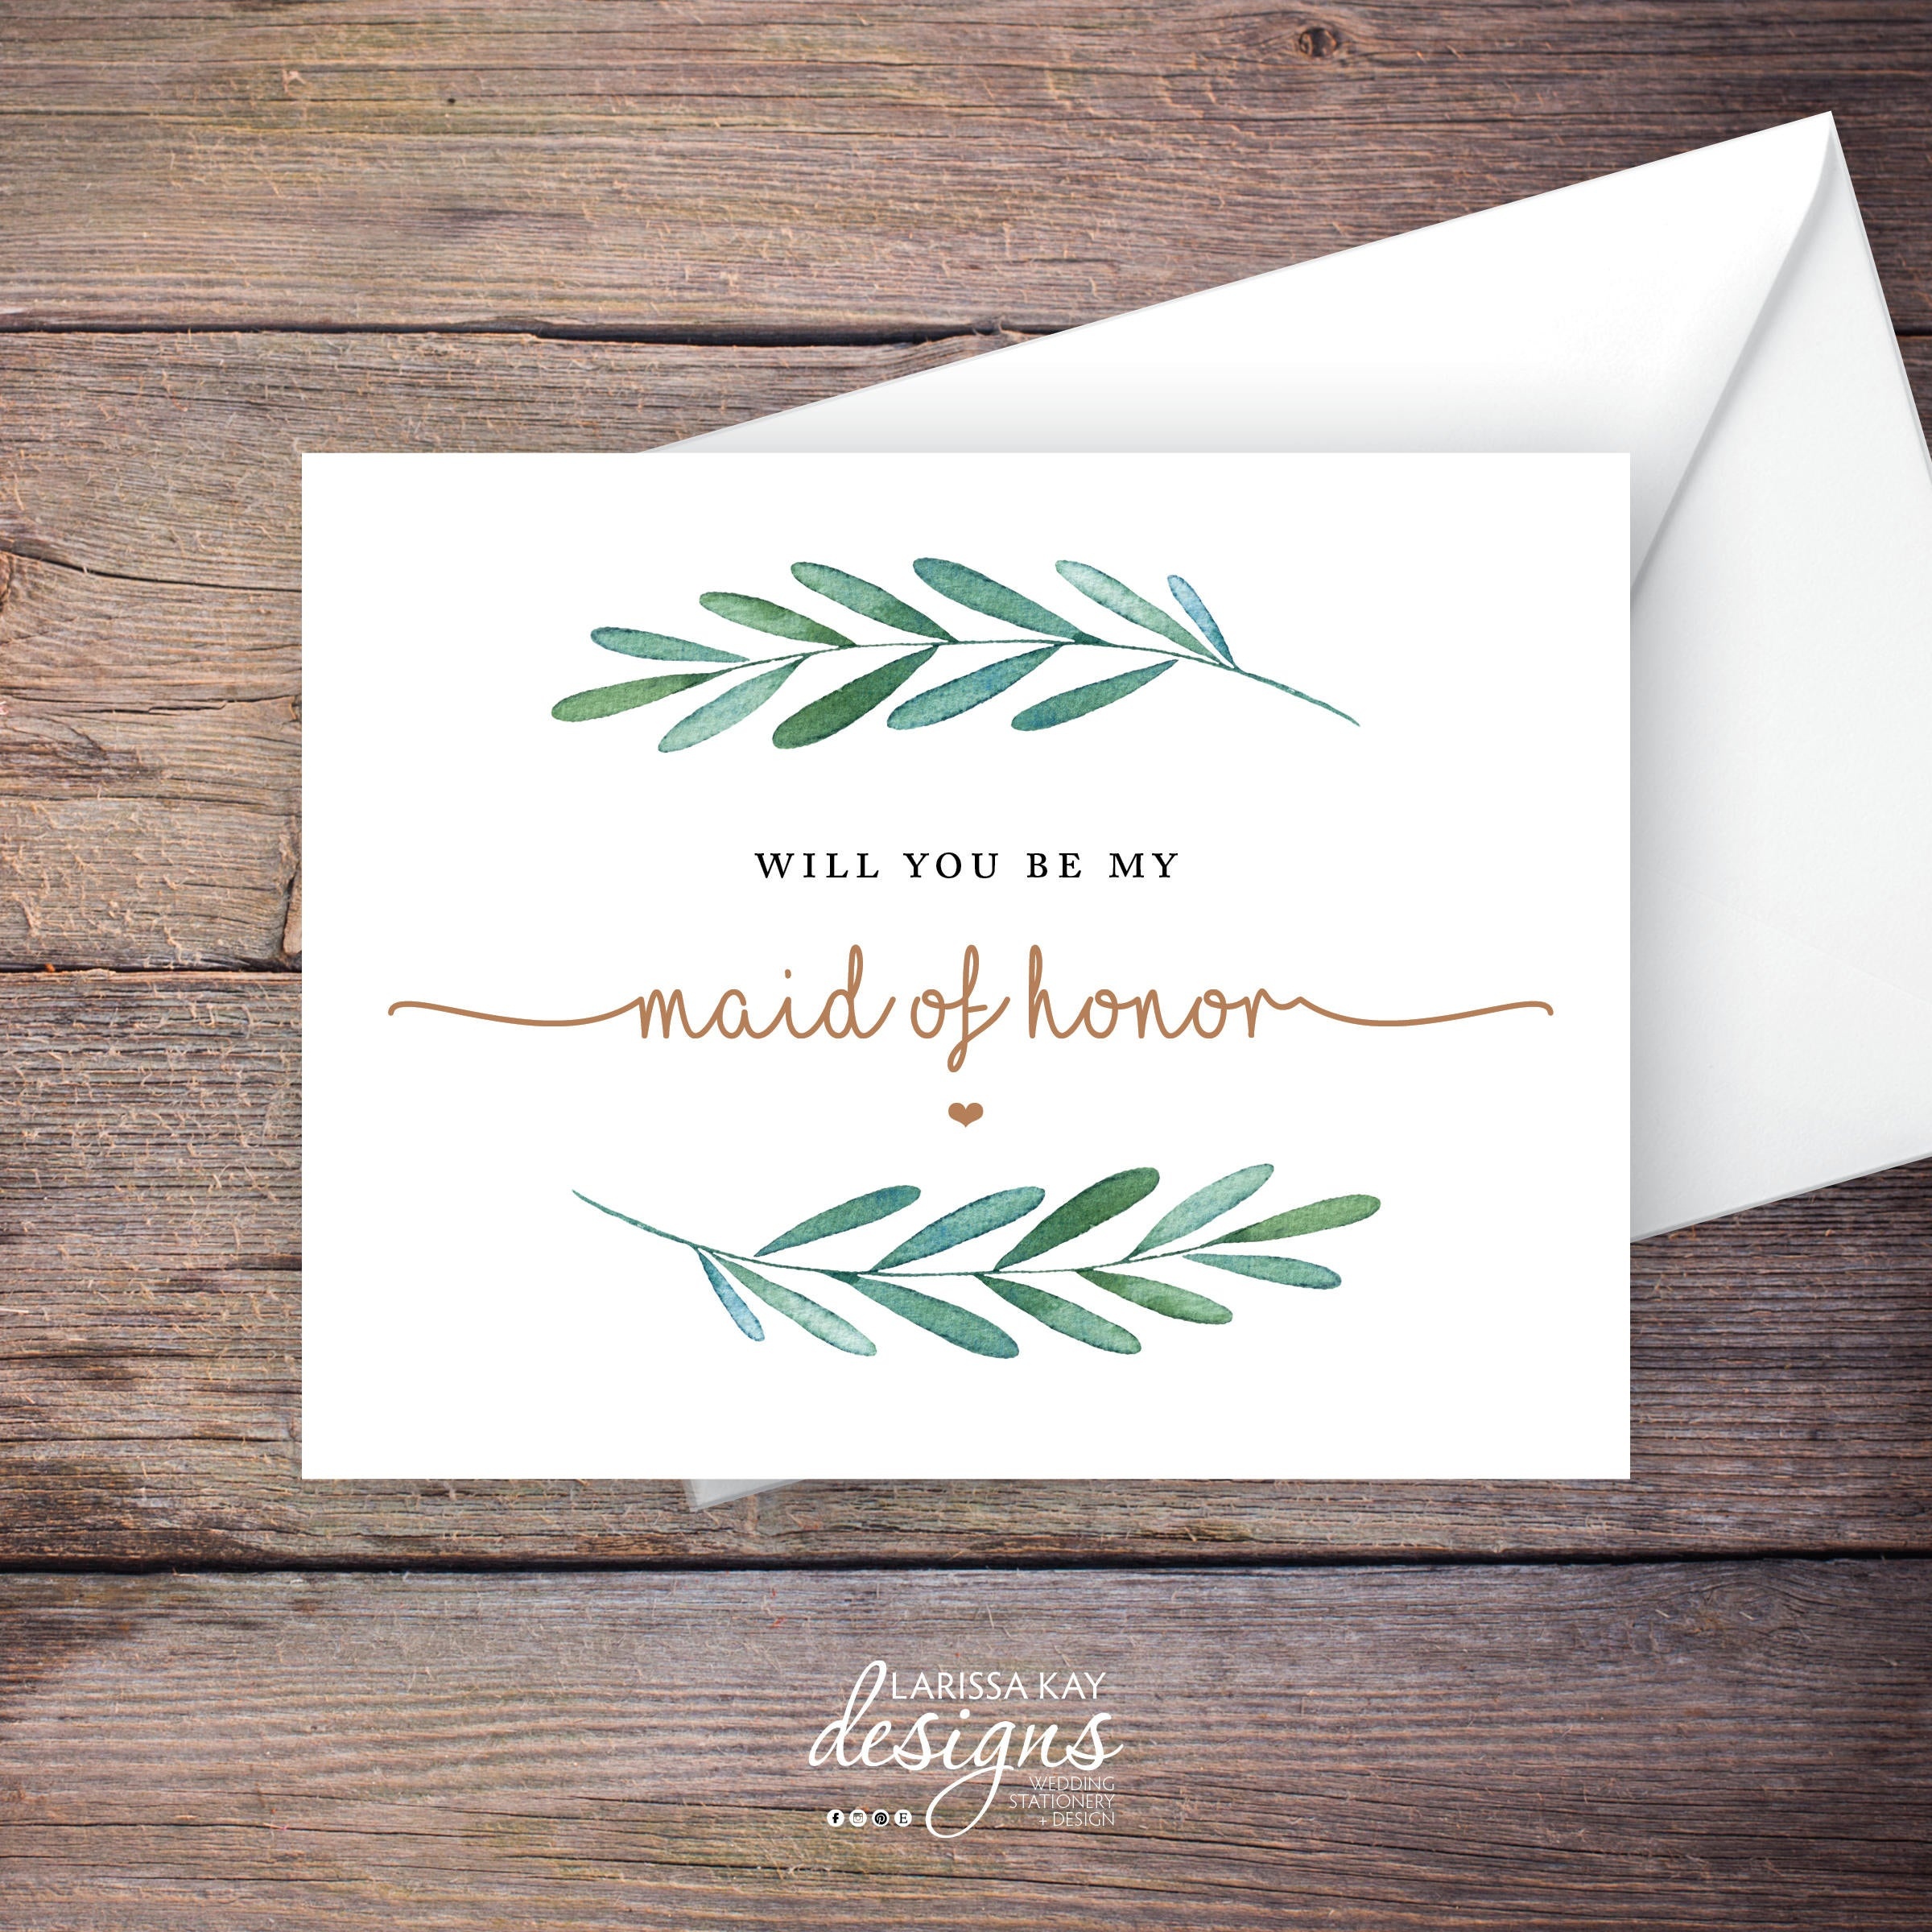 Printable Will You Be My Maid Of Honor Card Greenery Instant | Etsy - Free Printable Will You Be My Maid Of Honor Card